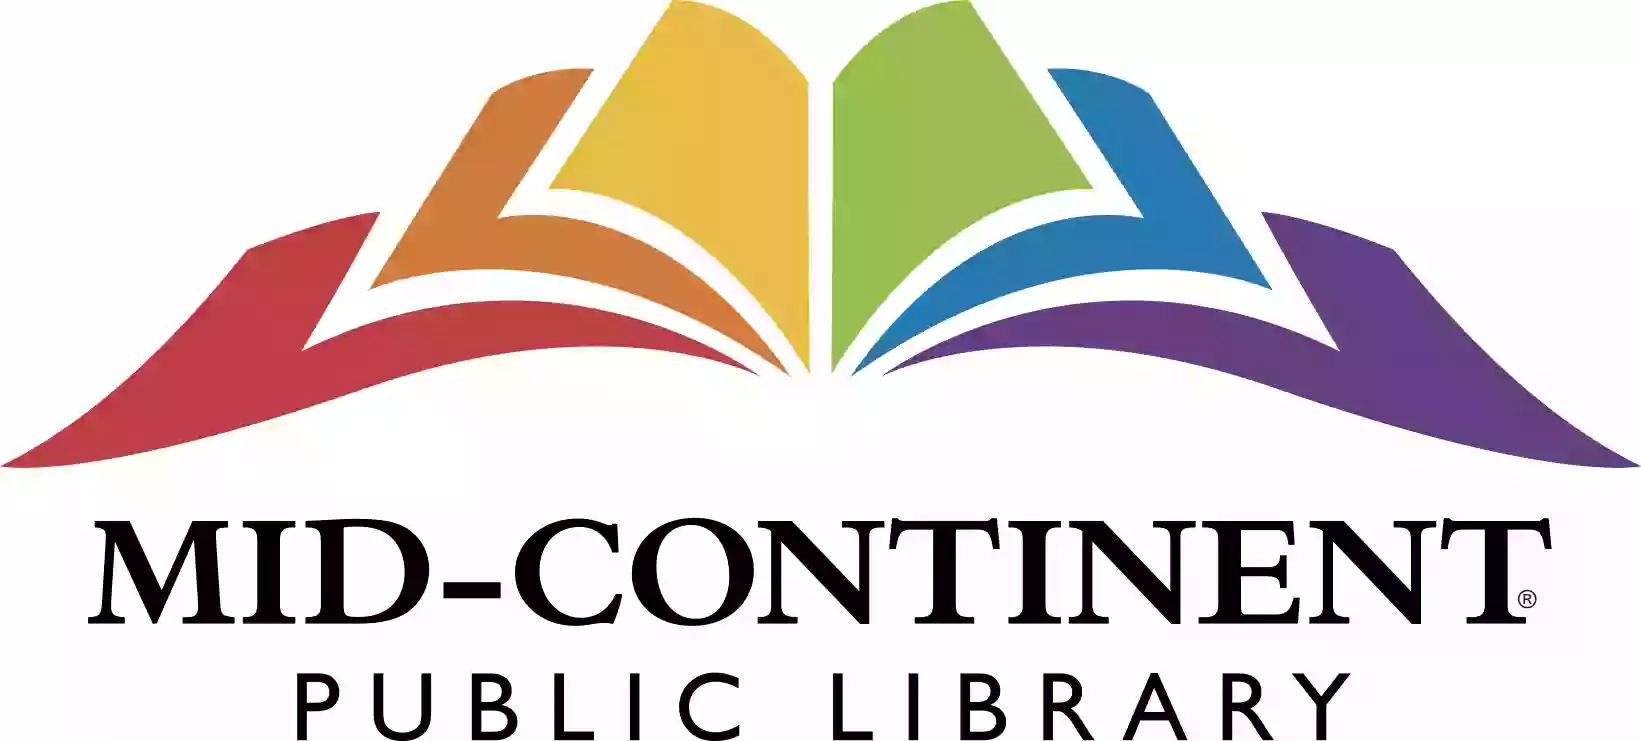 Mid-Continent Public Library - Kearney Branch